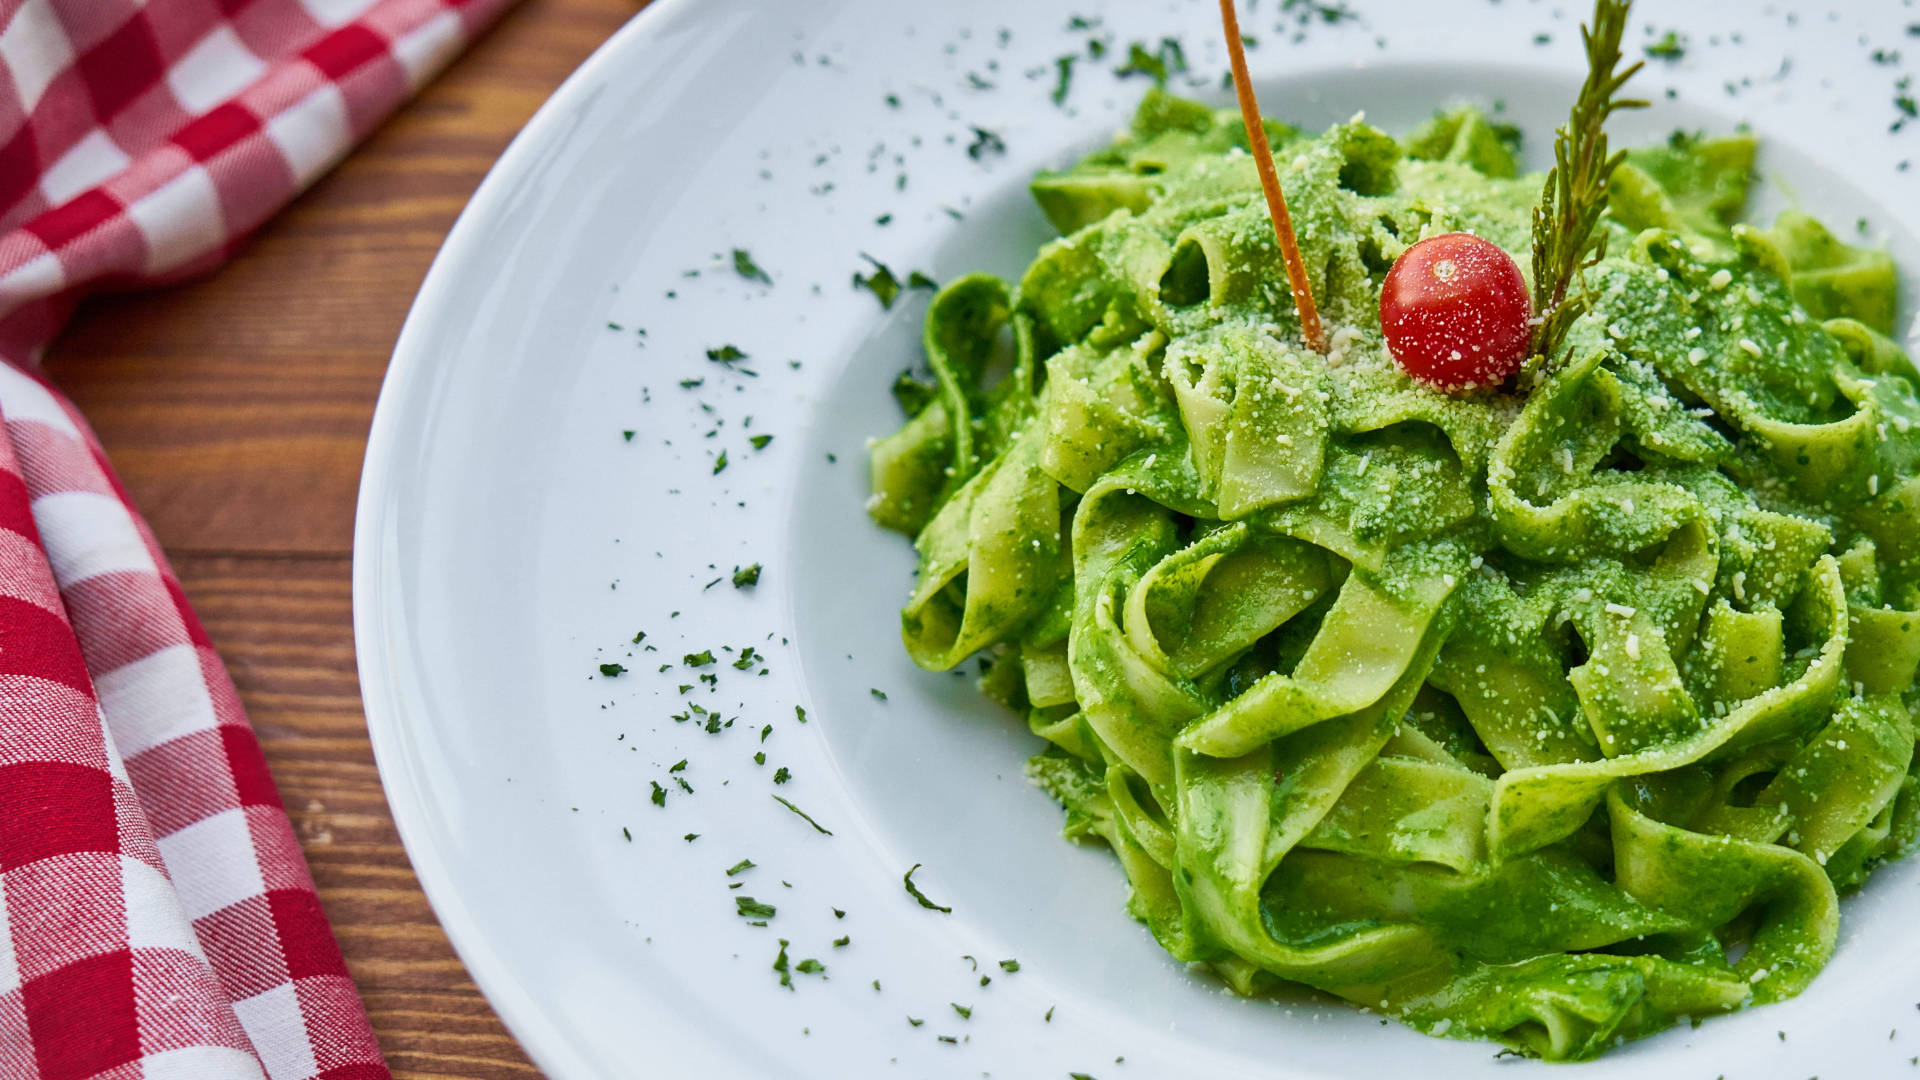 Green Pasta With Holly Background